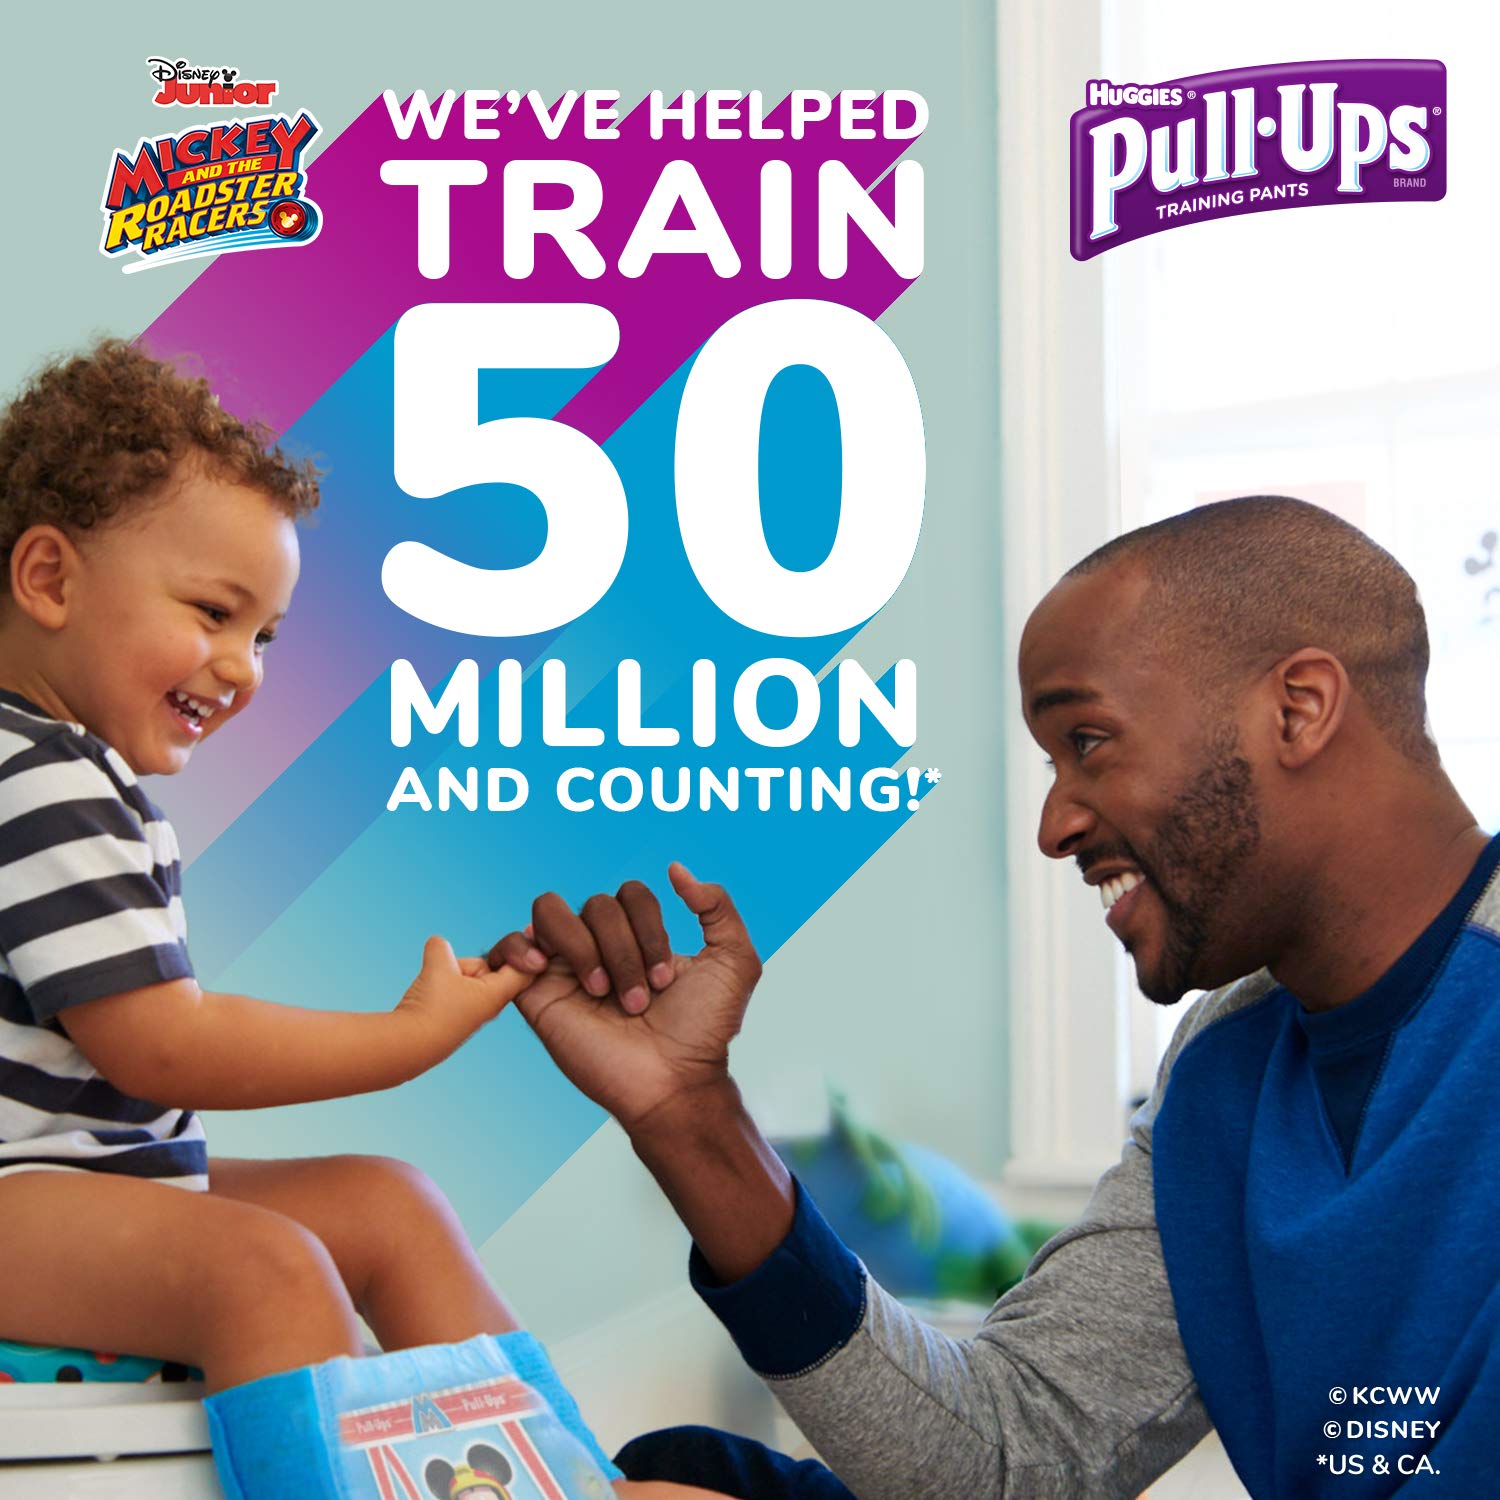 Pull-Ups Learning Designs Potty Training Pants for Boys, 4T-5T ( lb.), 18 Ct. (Packaging May Vary) - image 3 of 10